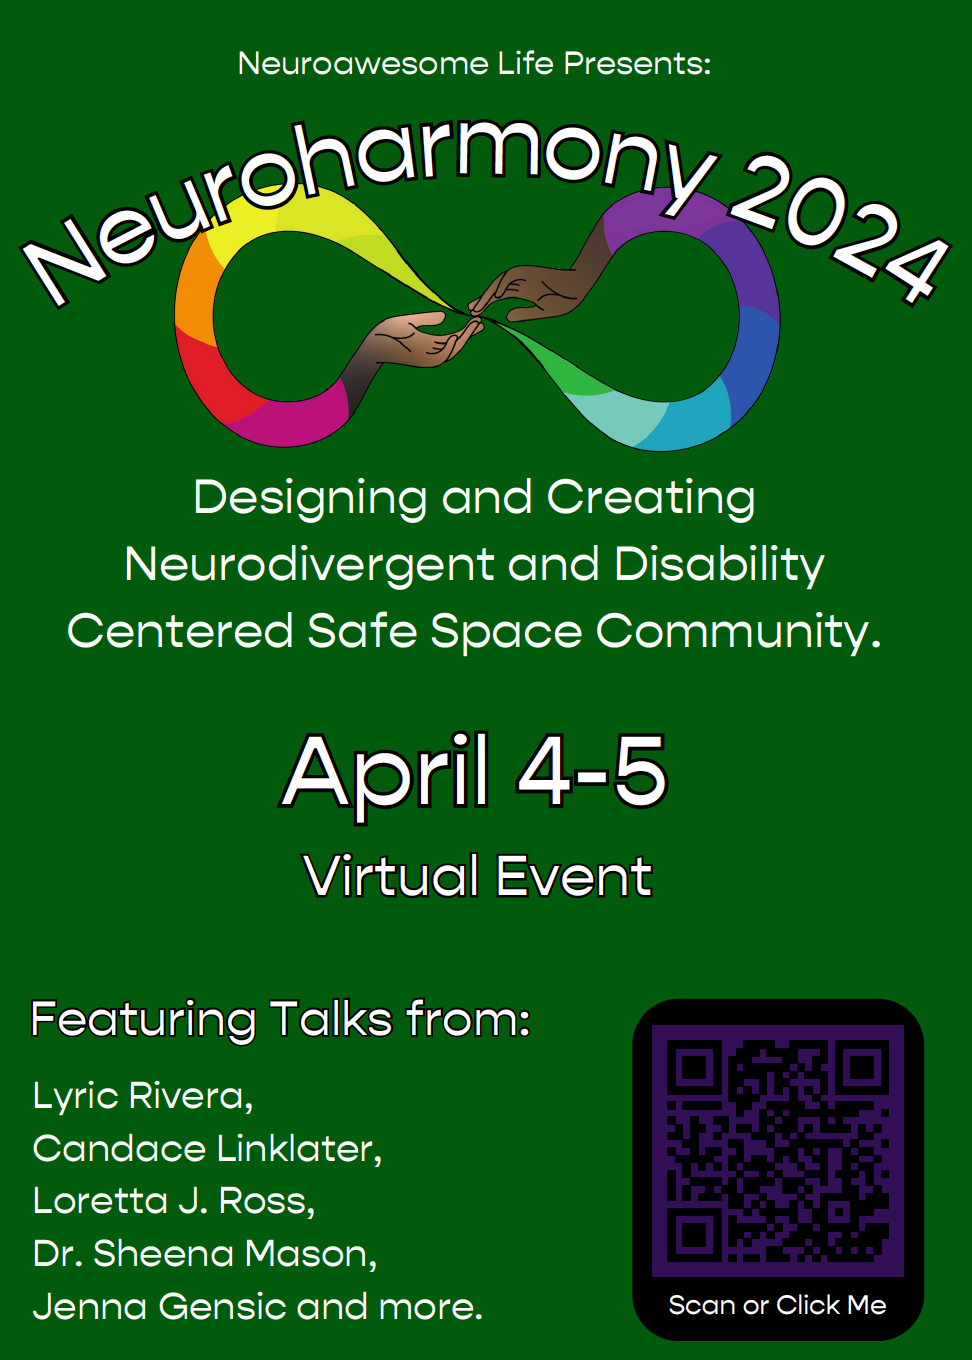 Neuroawesome Life presents: NeuroHarmony 2024 - Designating and creating NeuroDivergent and Disability Centered Safe Space Community. April 4-5. Virtual Event.Featuring talks from: Lyric Rivera, Candace Linklater, Loretta J. Ross, Dr. Sheena Mason, Jenna Gensic and more.